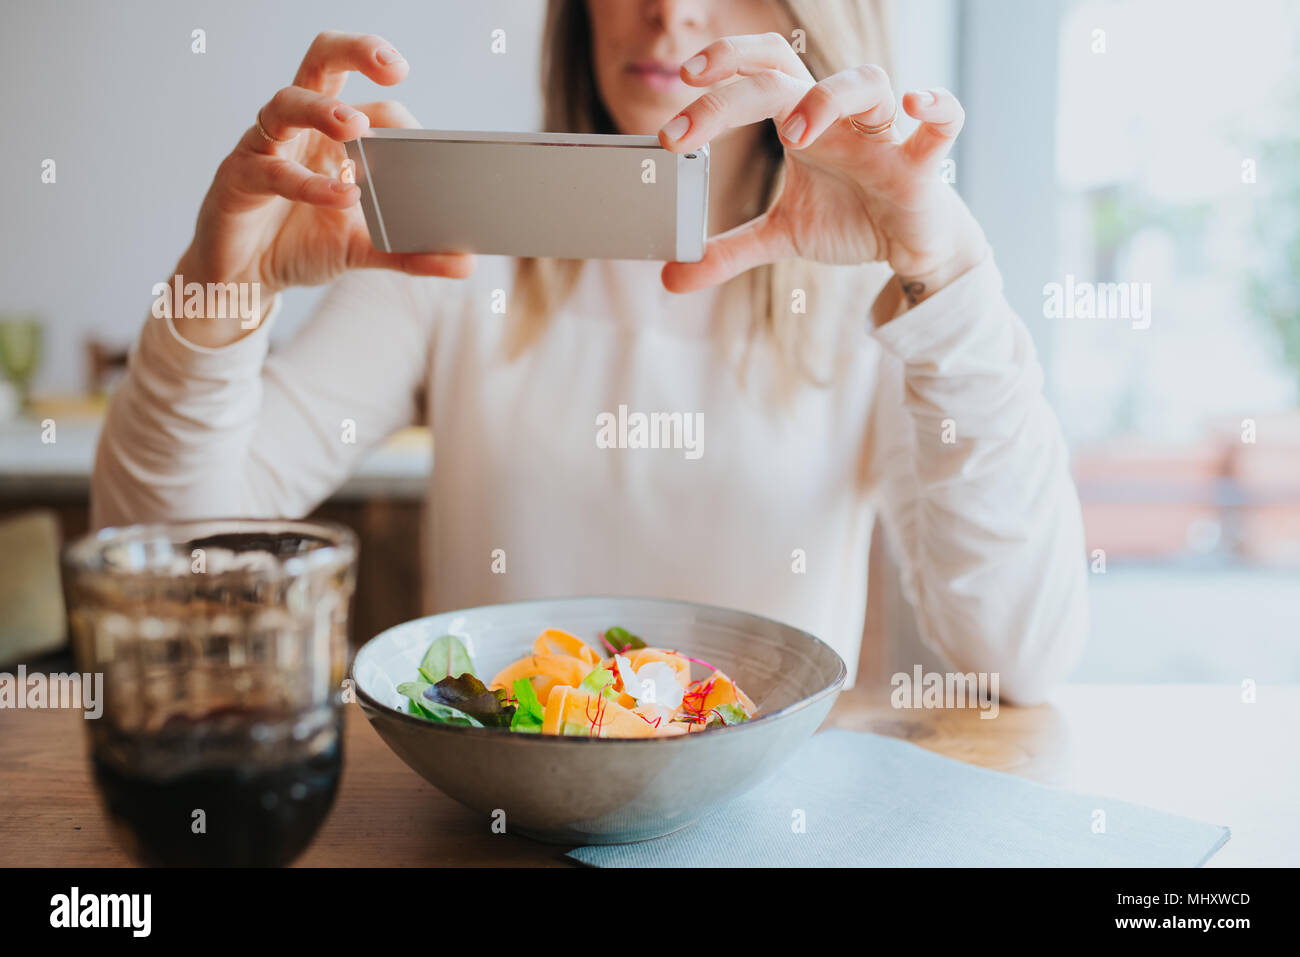 Woman taking photo of vegan meal in restaurant Stock Photo